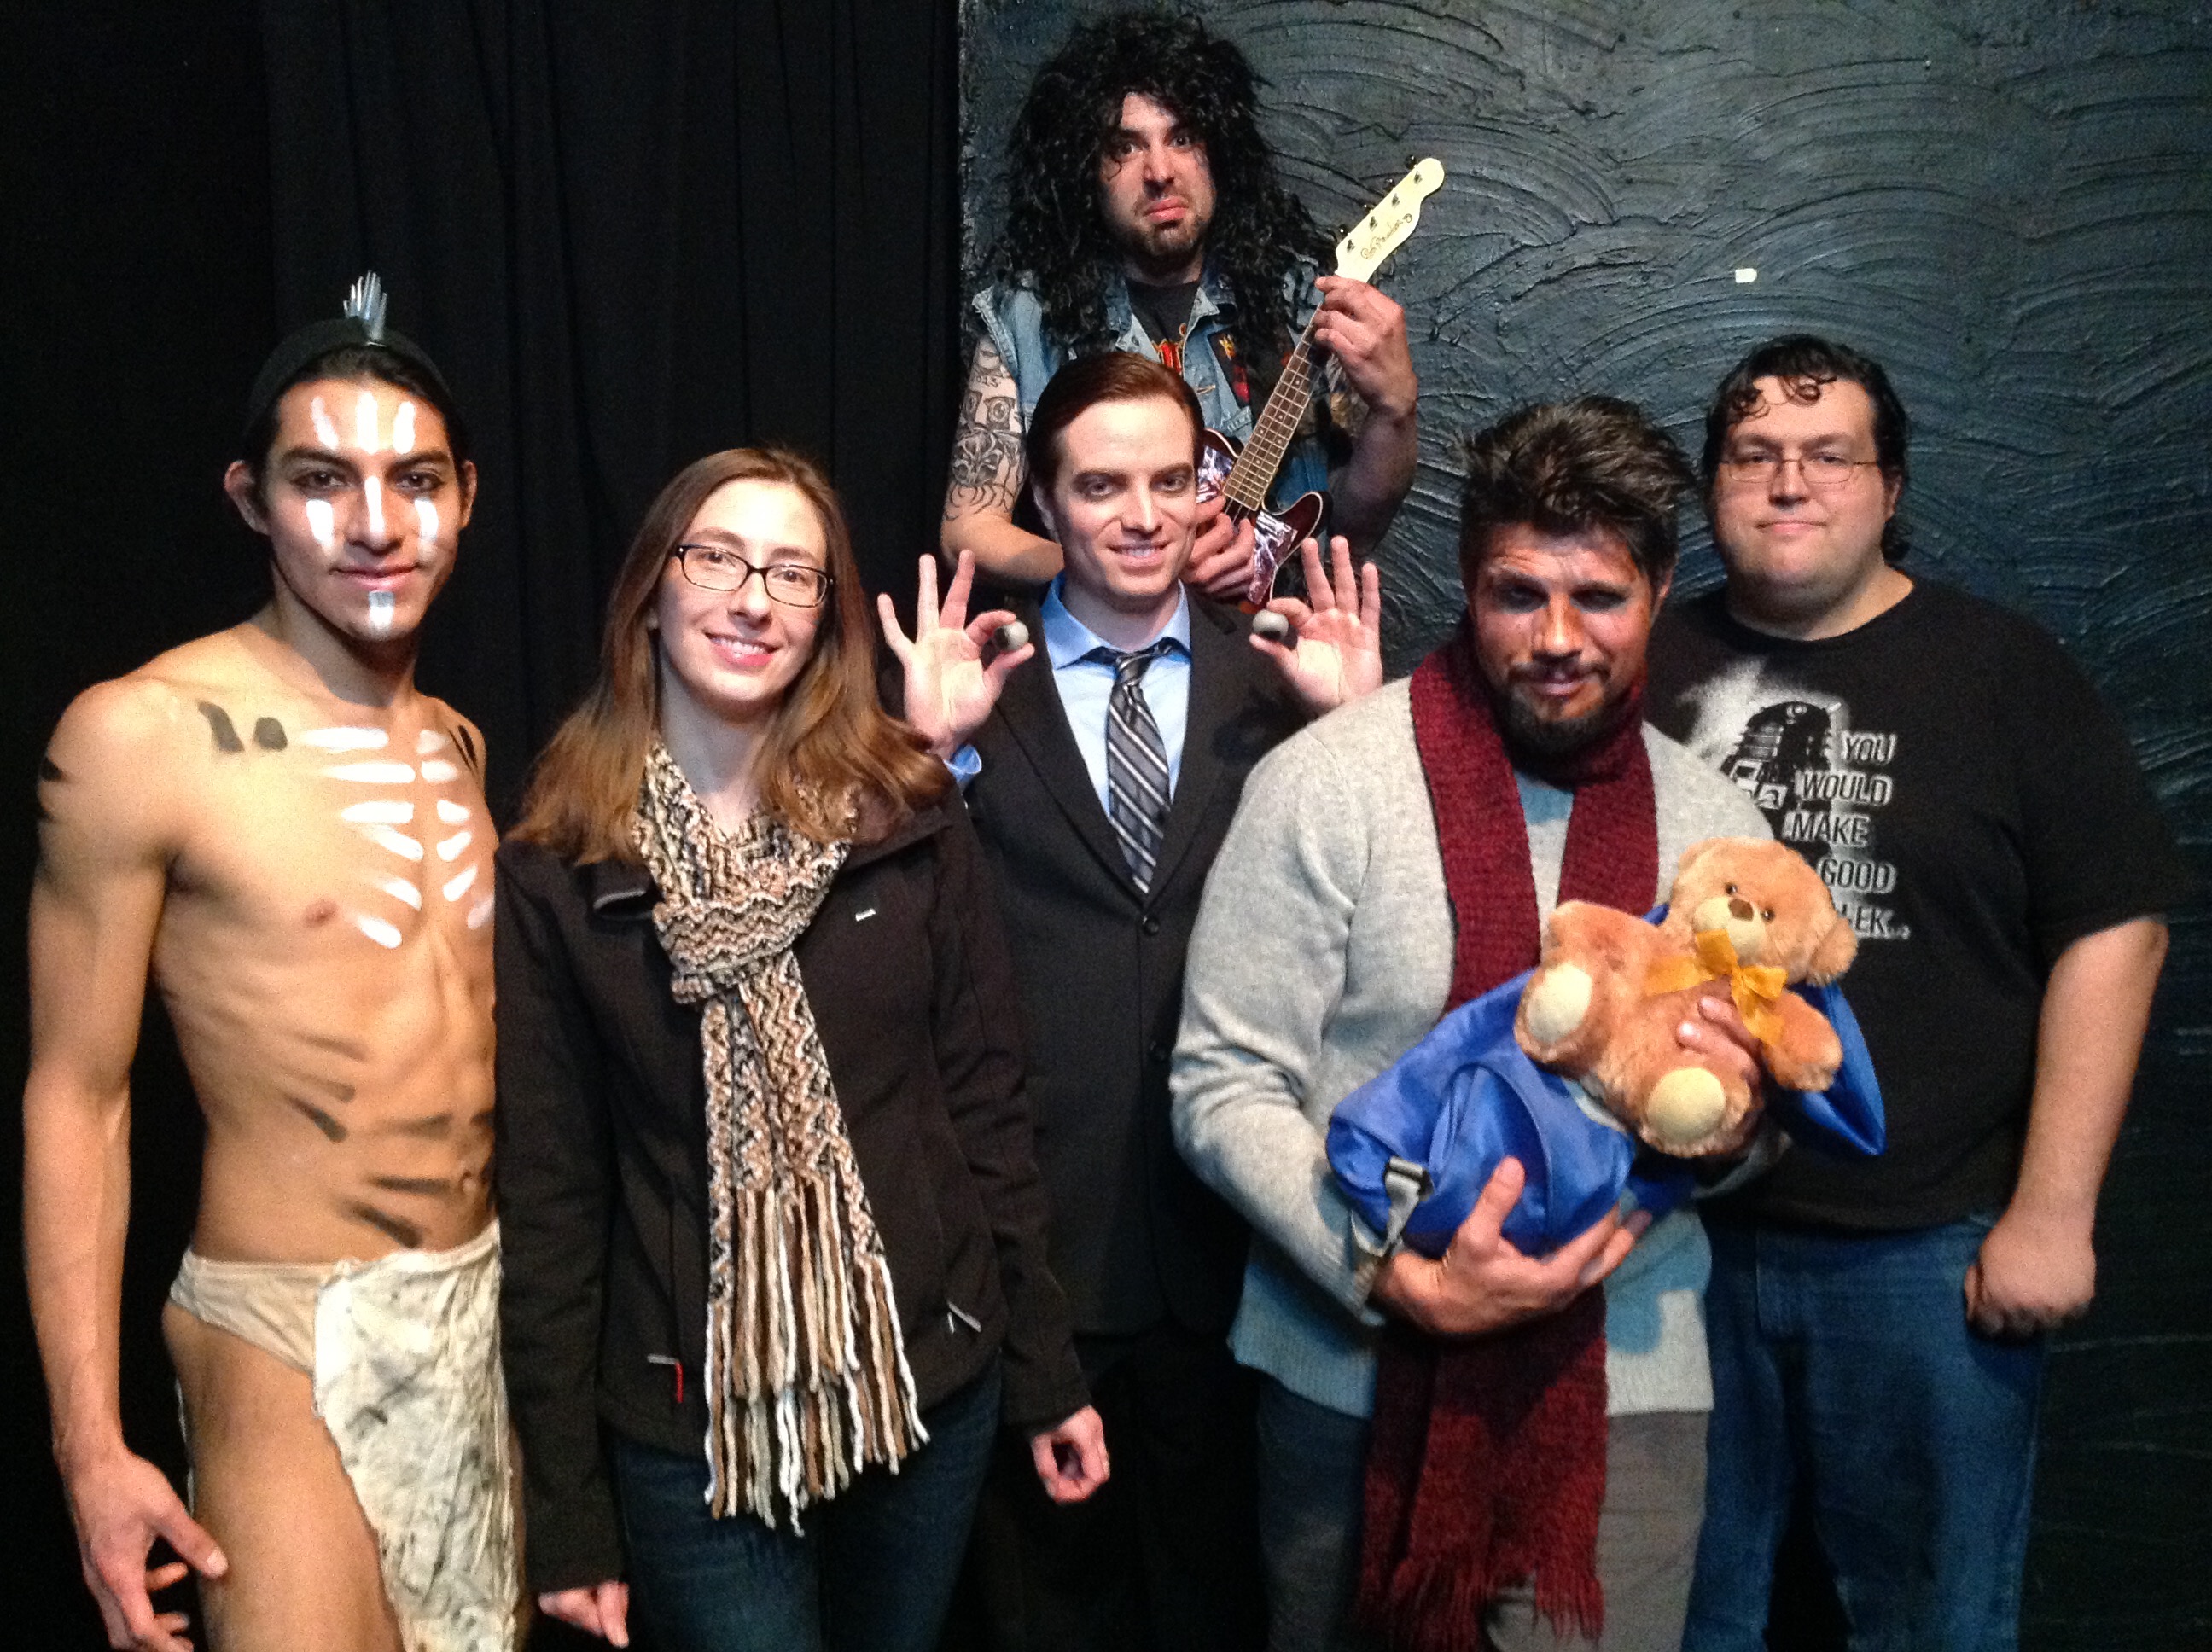 With my cast members, director, and writer for Zombie Joe's 50 Hour Drive-By Theatre Festival. Left to right: Daniel Palma, Jana Wimer, Matthan Harris, Kevin Van Cott, Magnus MacDomhnaill, Steven Alloway (1/25/2016).